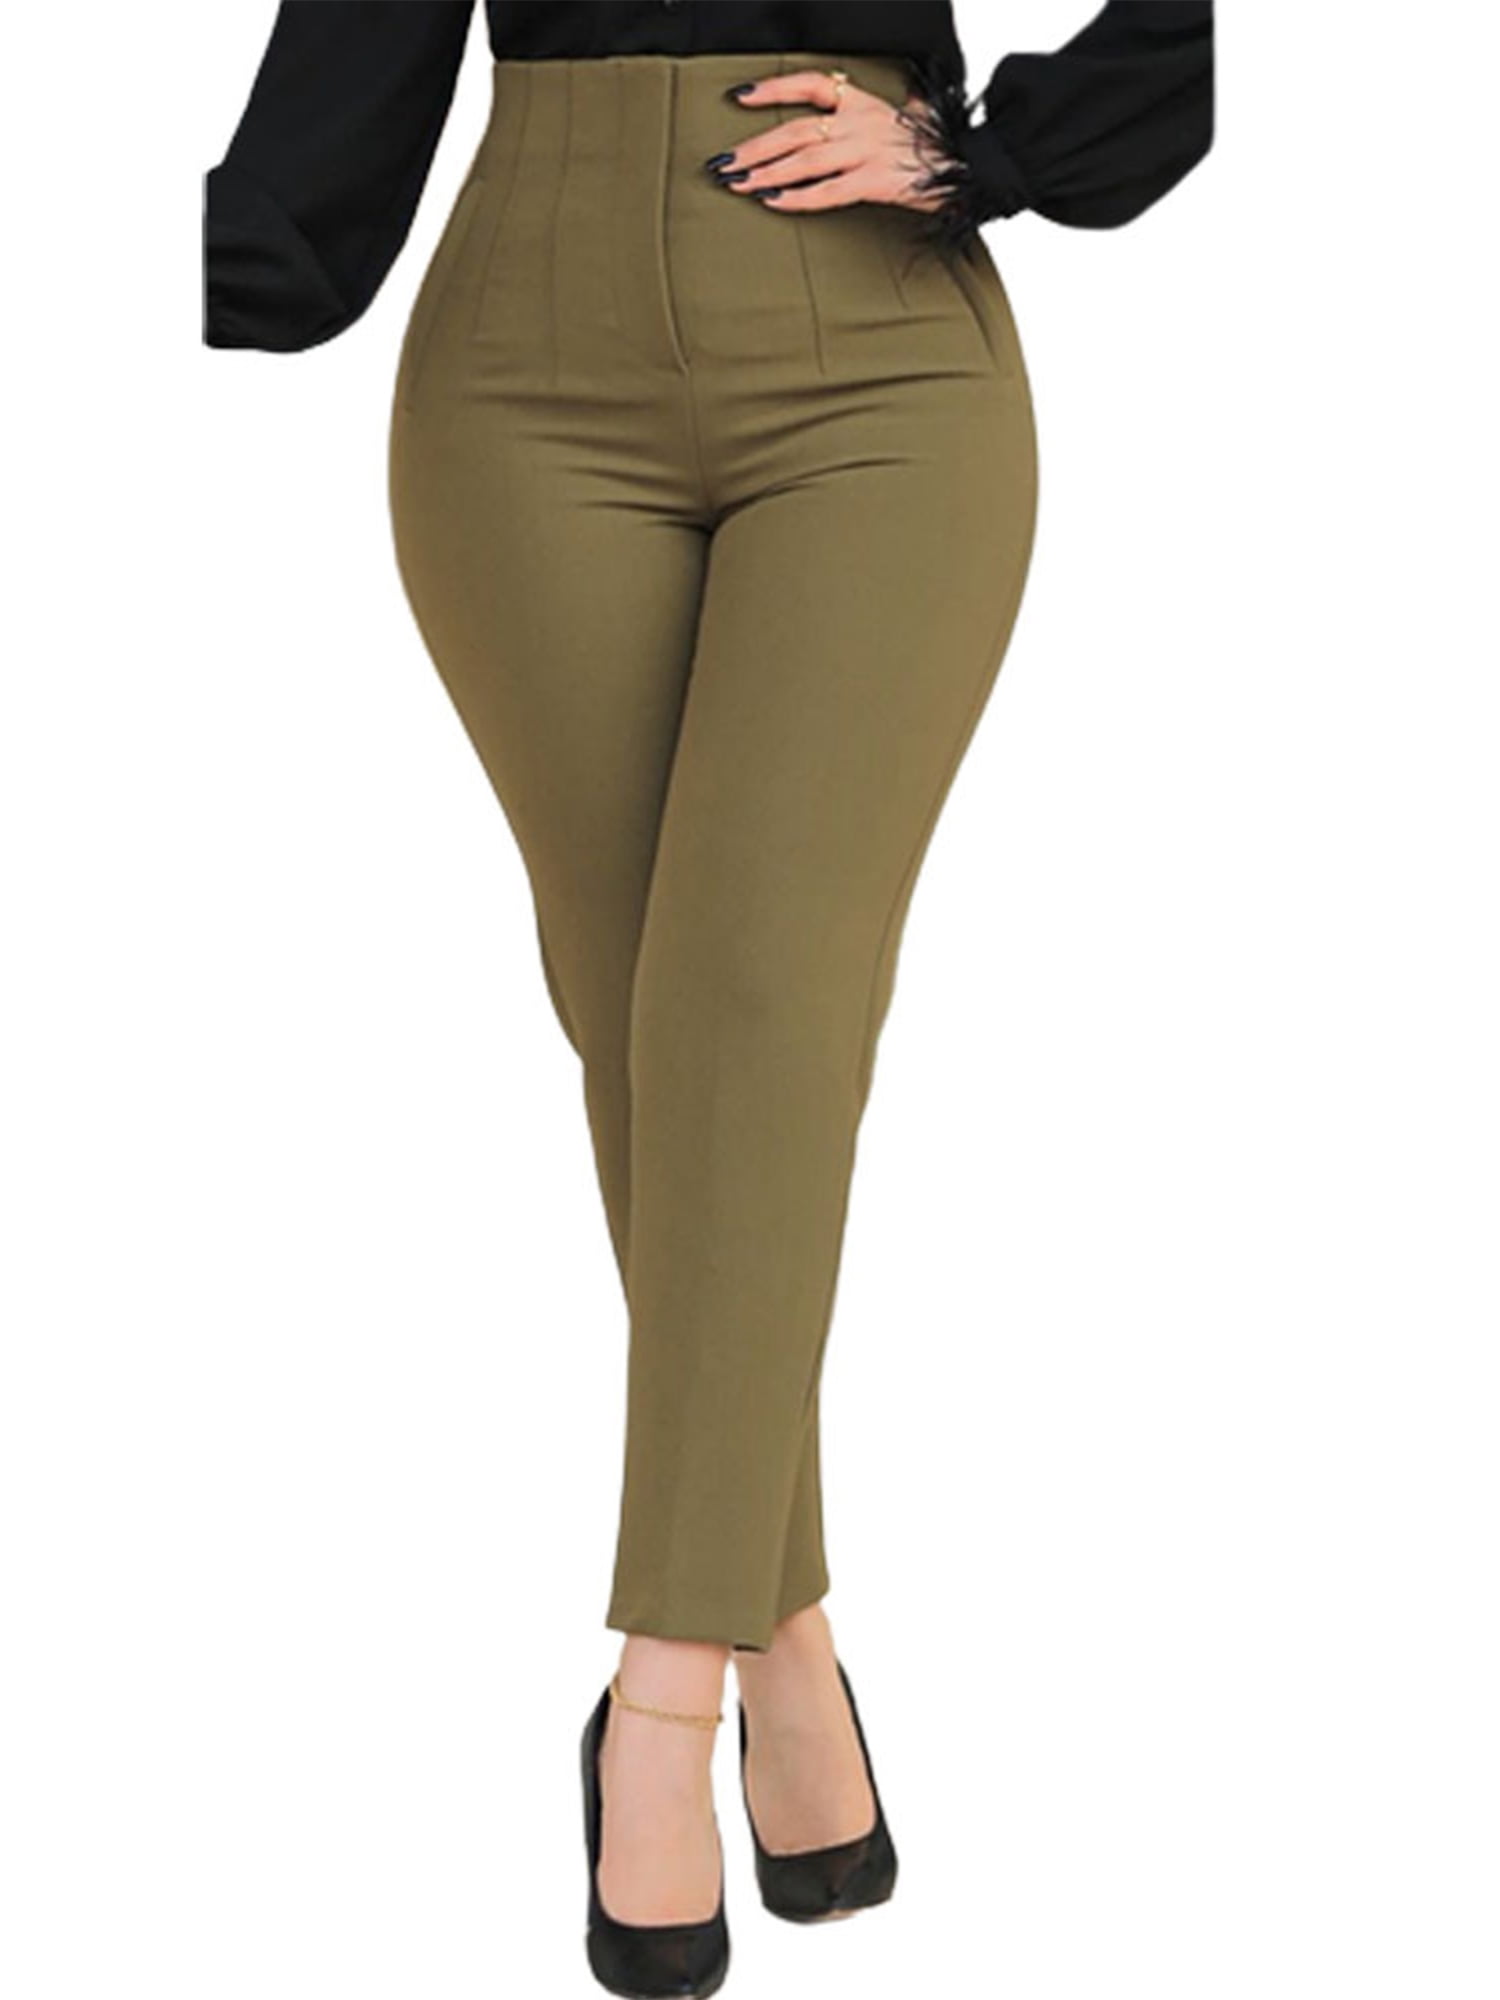 Grianlook Womens Work Dress Pants Office Business Casual Slacks Ladies  Regular Straight Leg Trousers with Pockets Army Green XL 